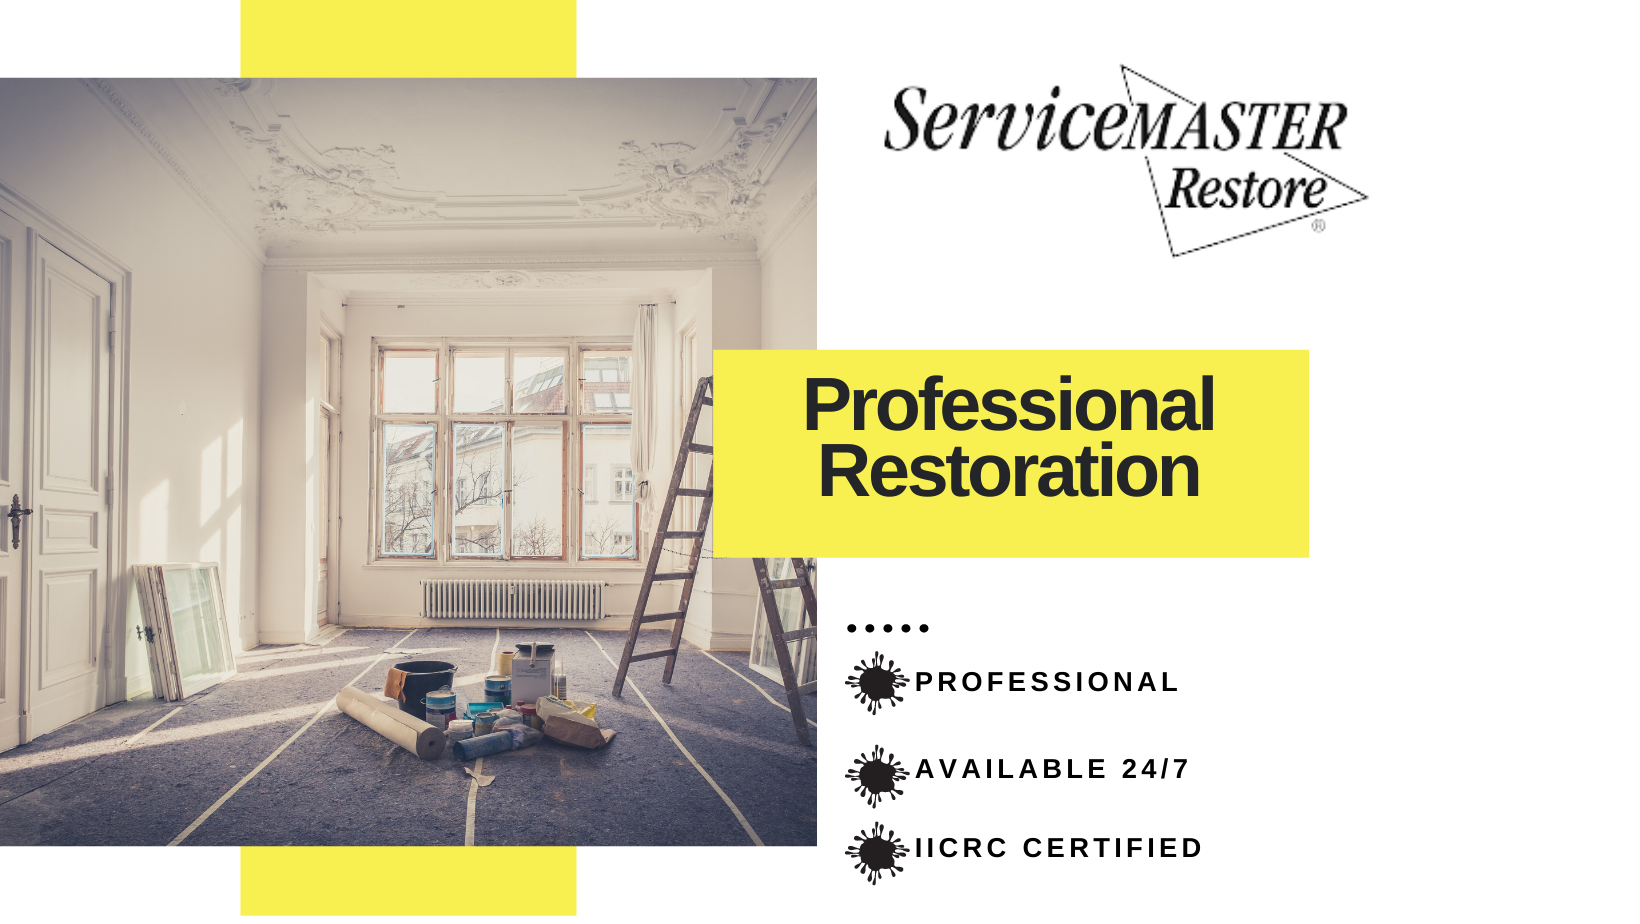 Mold Remediation by ServiceMaster